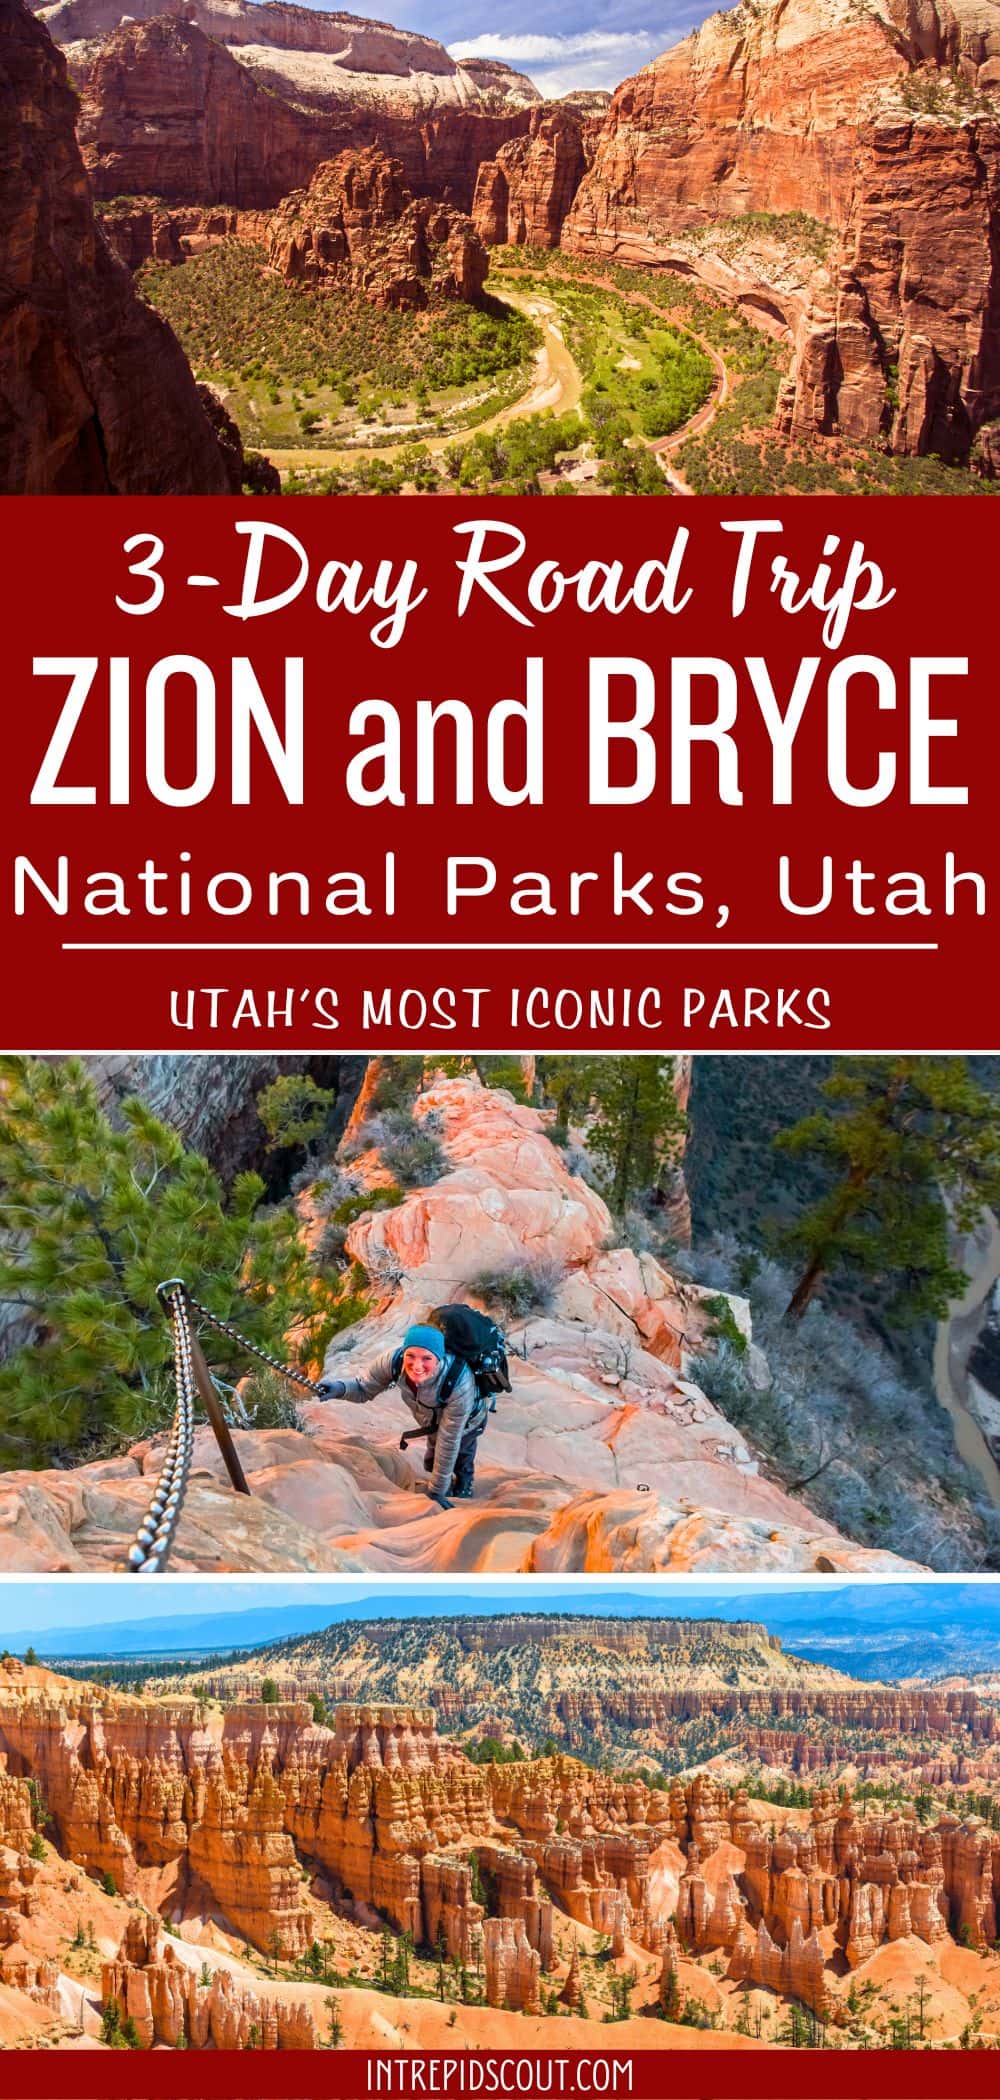 Zion and Bryce: 3-Day Road Trip